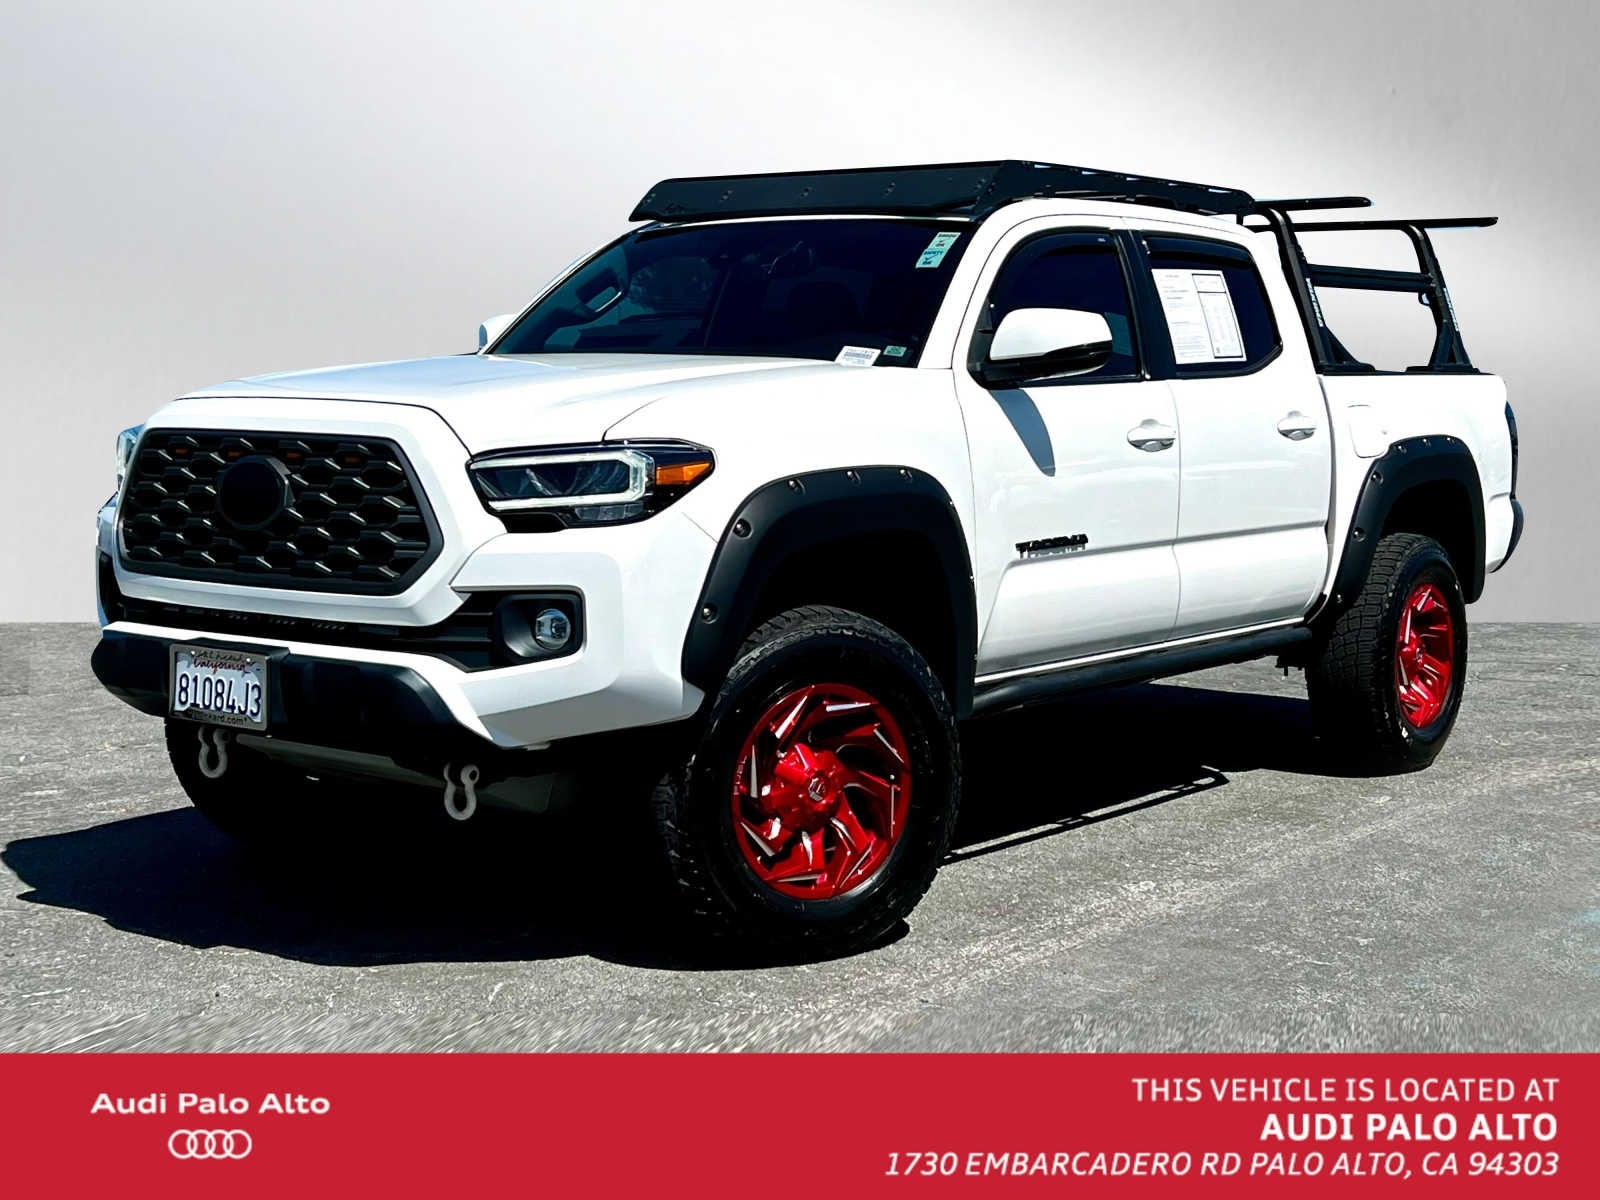 2021 Toyota Tacoma TRD Off Road Double Cab 5 Bed V6 MT